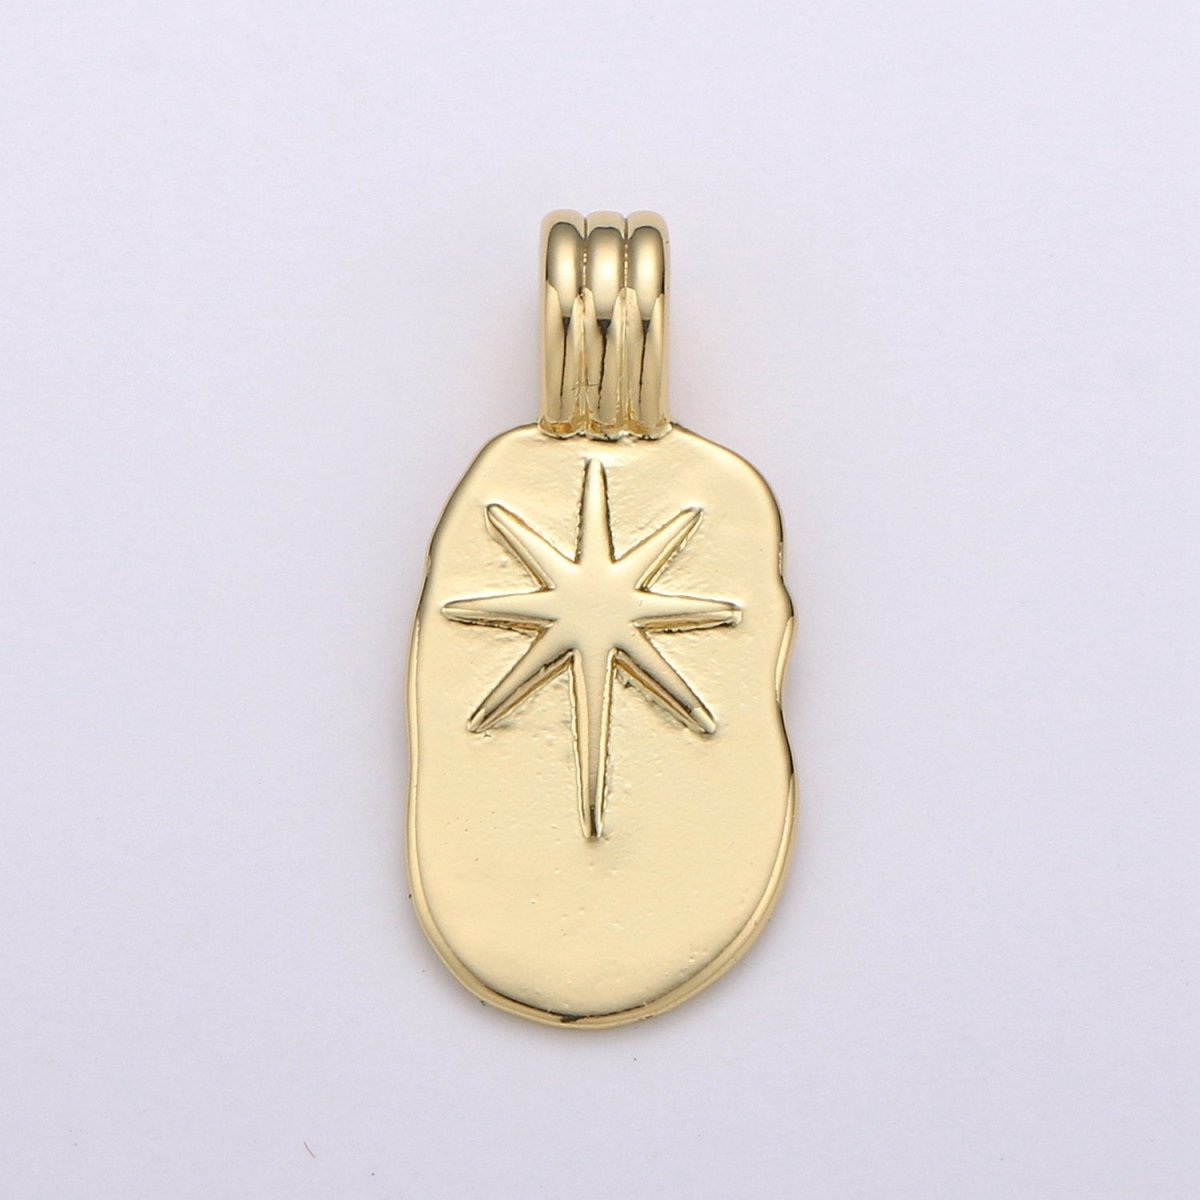 Dainty 14k Gold Filled North Star Charm - Gold Star Charm, Celstial Jewelry for Necklace Component Supply I-782 - DLUXCA